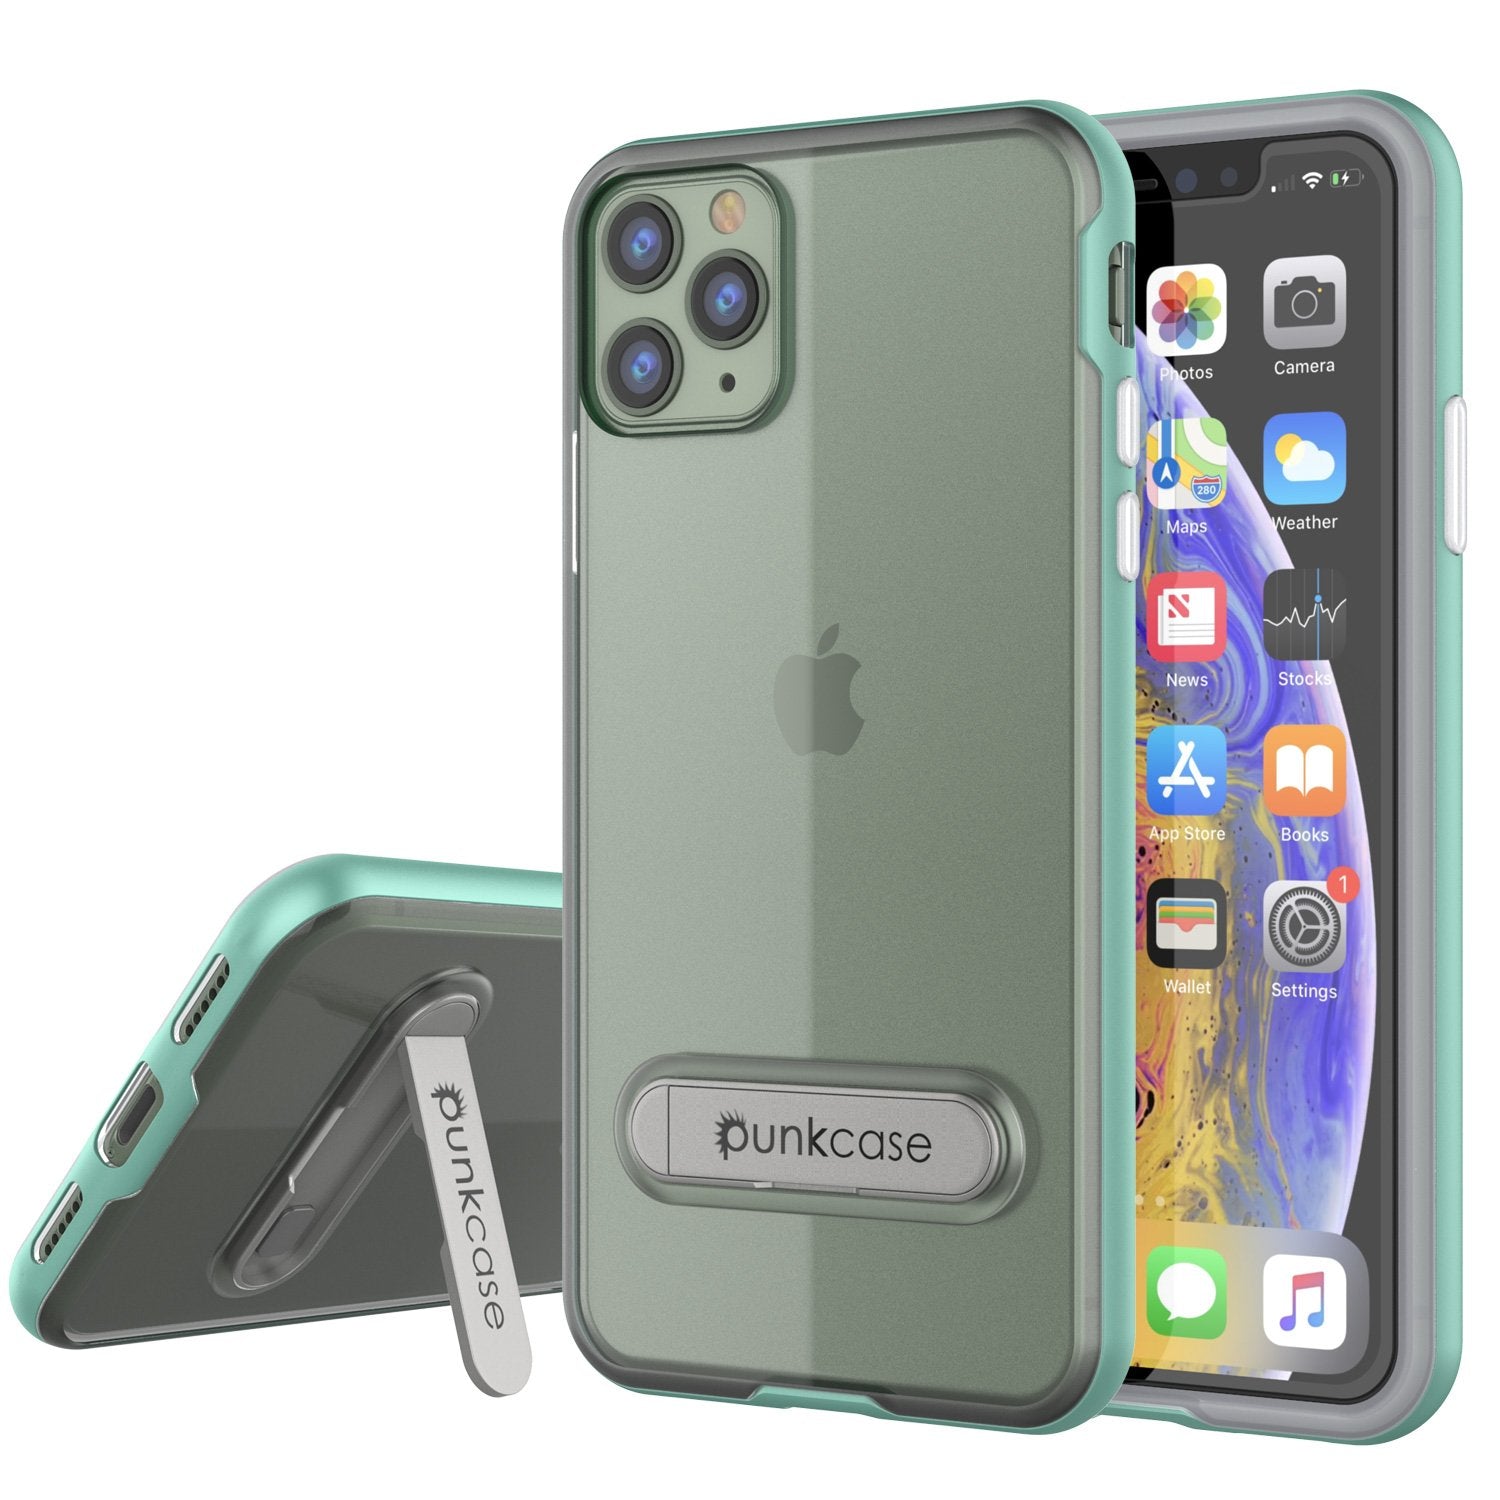 iPhone 12 Pro Case, PUNKcase [LUCID 3.0 Series] [Slim Fit] Protective Cover w/ Integrated Screen Protector [Teal] (Color in image: Teal)